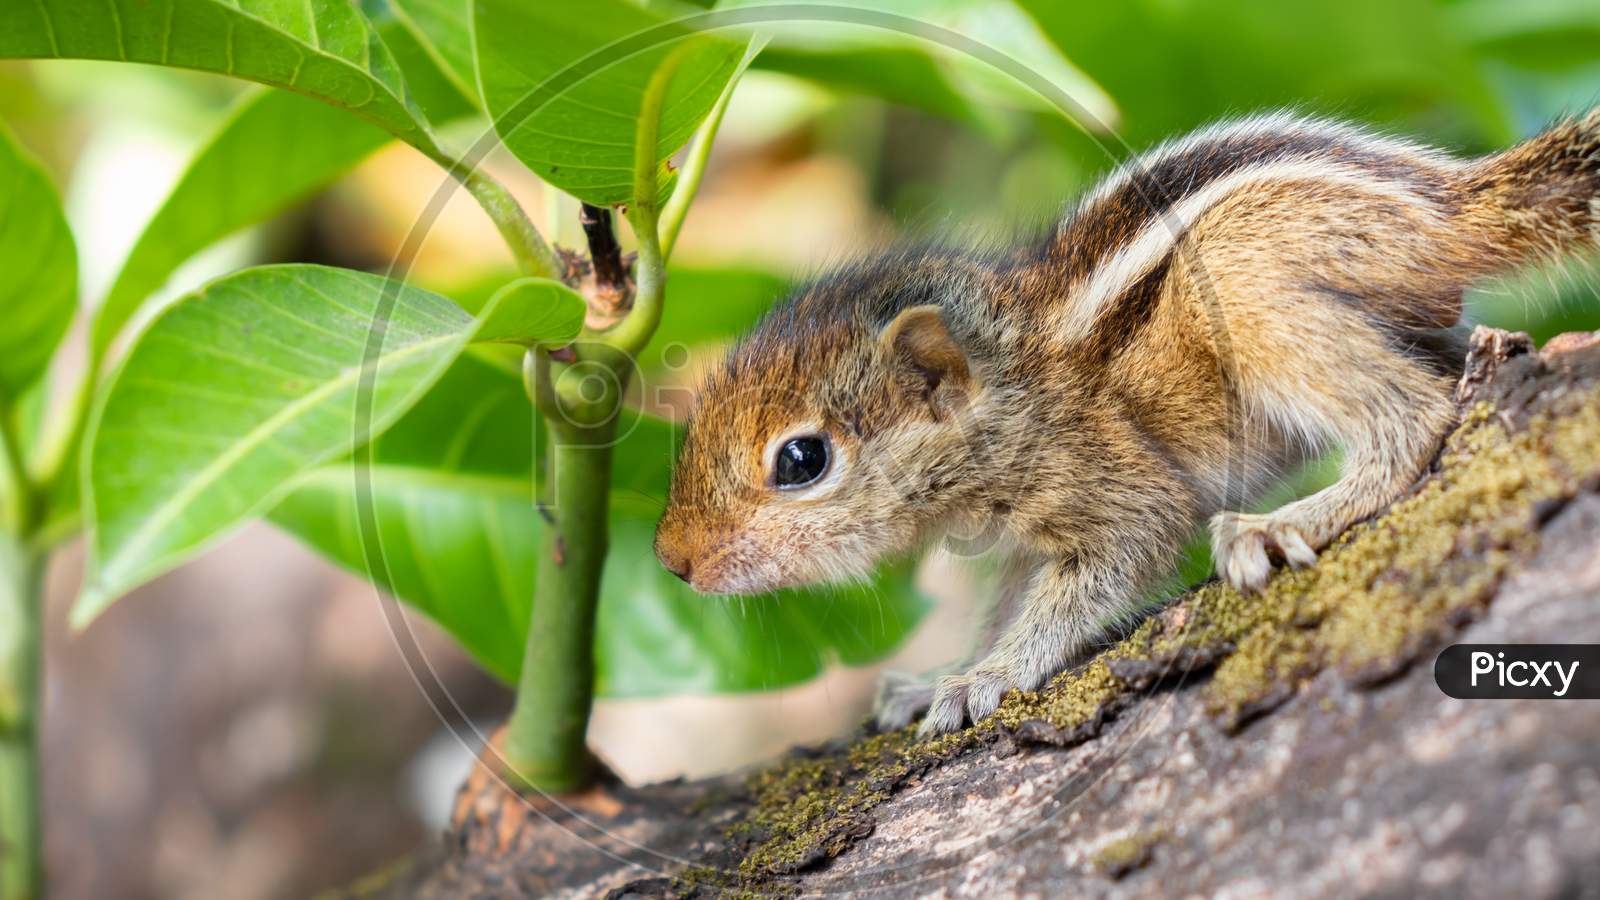 Hungry Little Baby Squirrel Looking Afraid